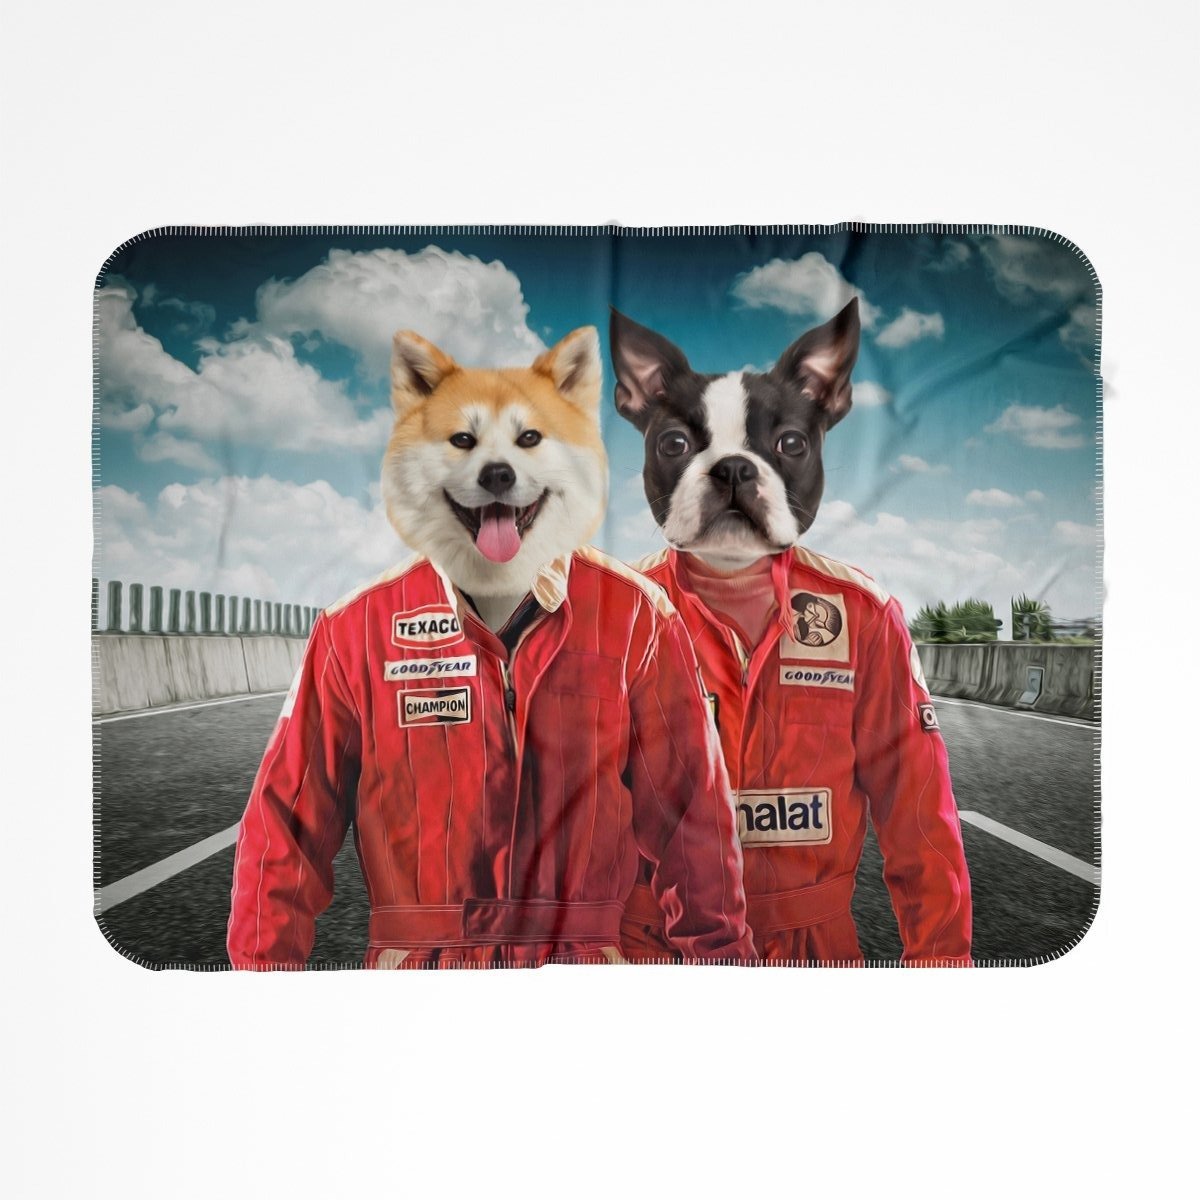 The Race Car Drivers: Custom Pet Blanket - Paw & Glory - #pet portraits# - #dog portraits# - #pet portraits uk#Pawandglory, Pet art blanket,dog fluffy blanket, personalised blankets for dogs, dog in blankets, dog printed blanket, put your dog's face on a blanket